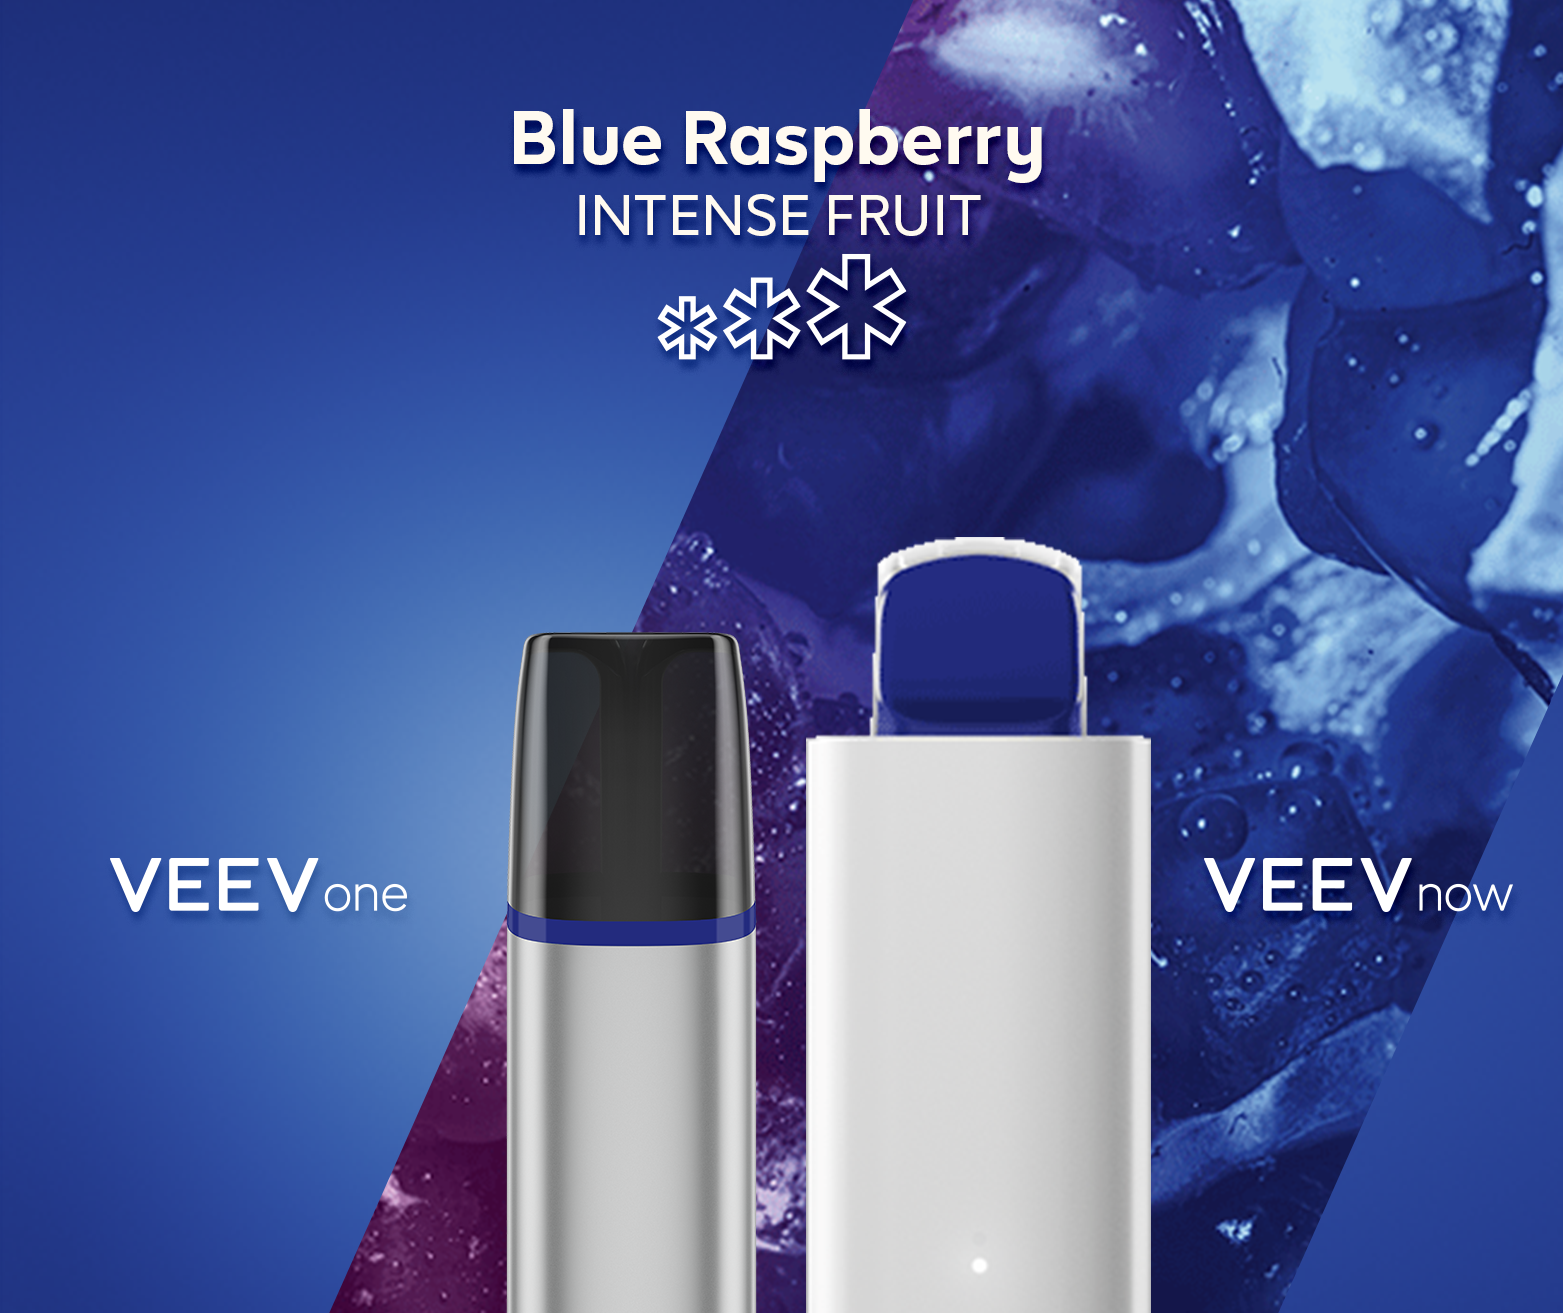 Blue Raspberry VEEV ONE device and VEEV NOW 5 mL disposable- Intense Fruit